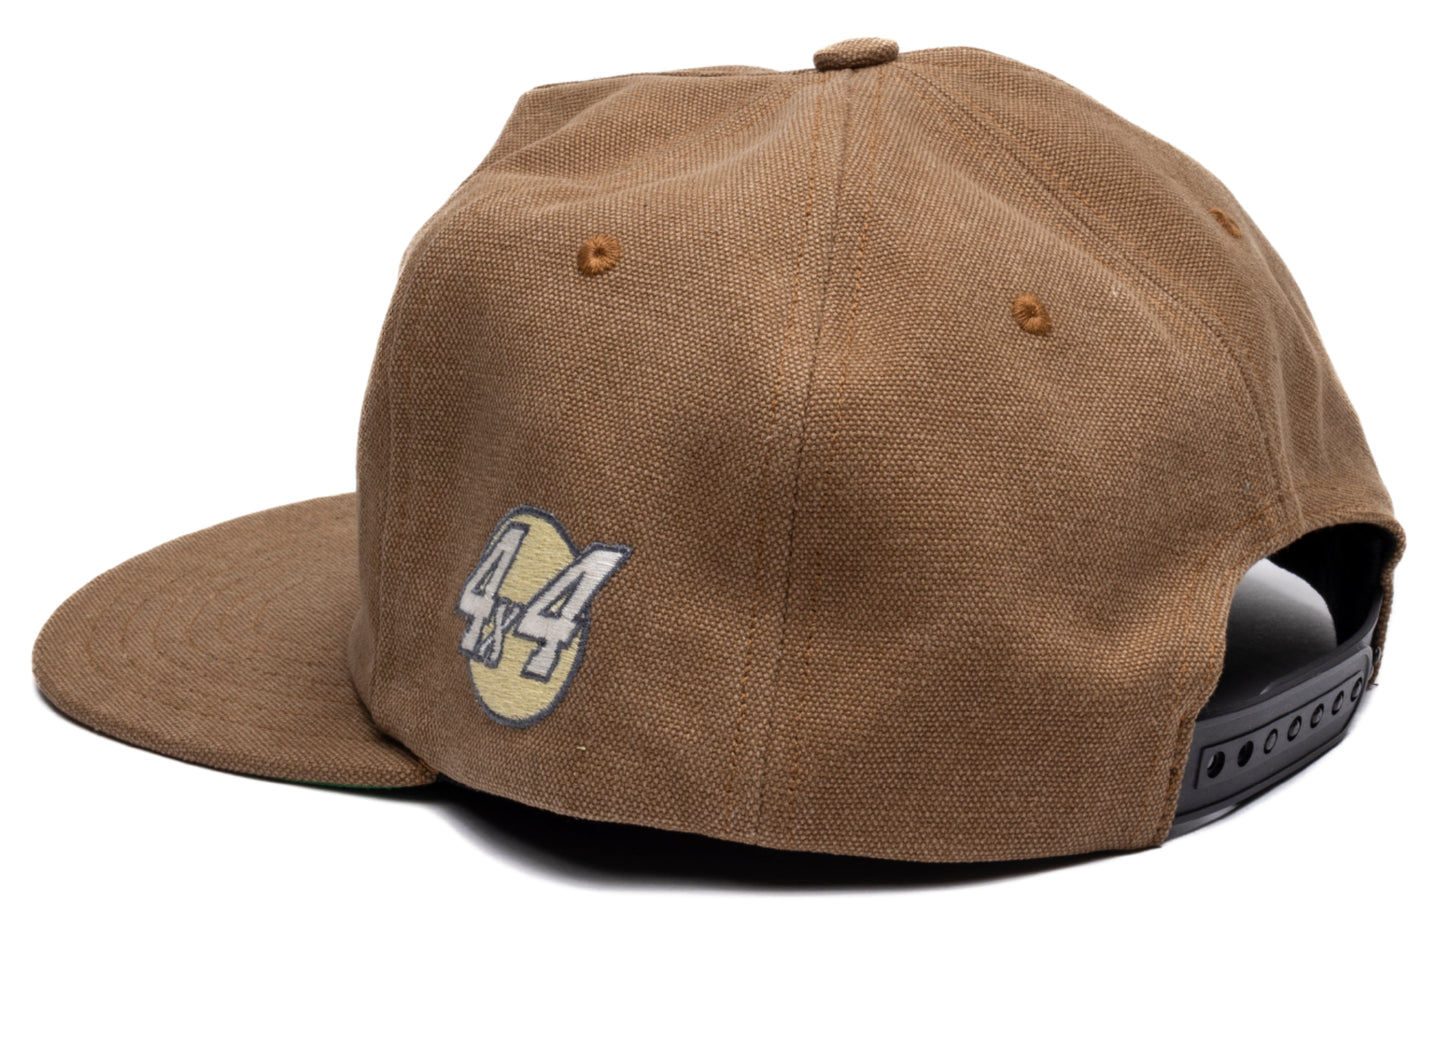 Rhude Desert Team – Washed Canvas Boutique Hat Oneness